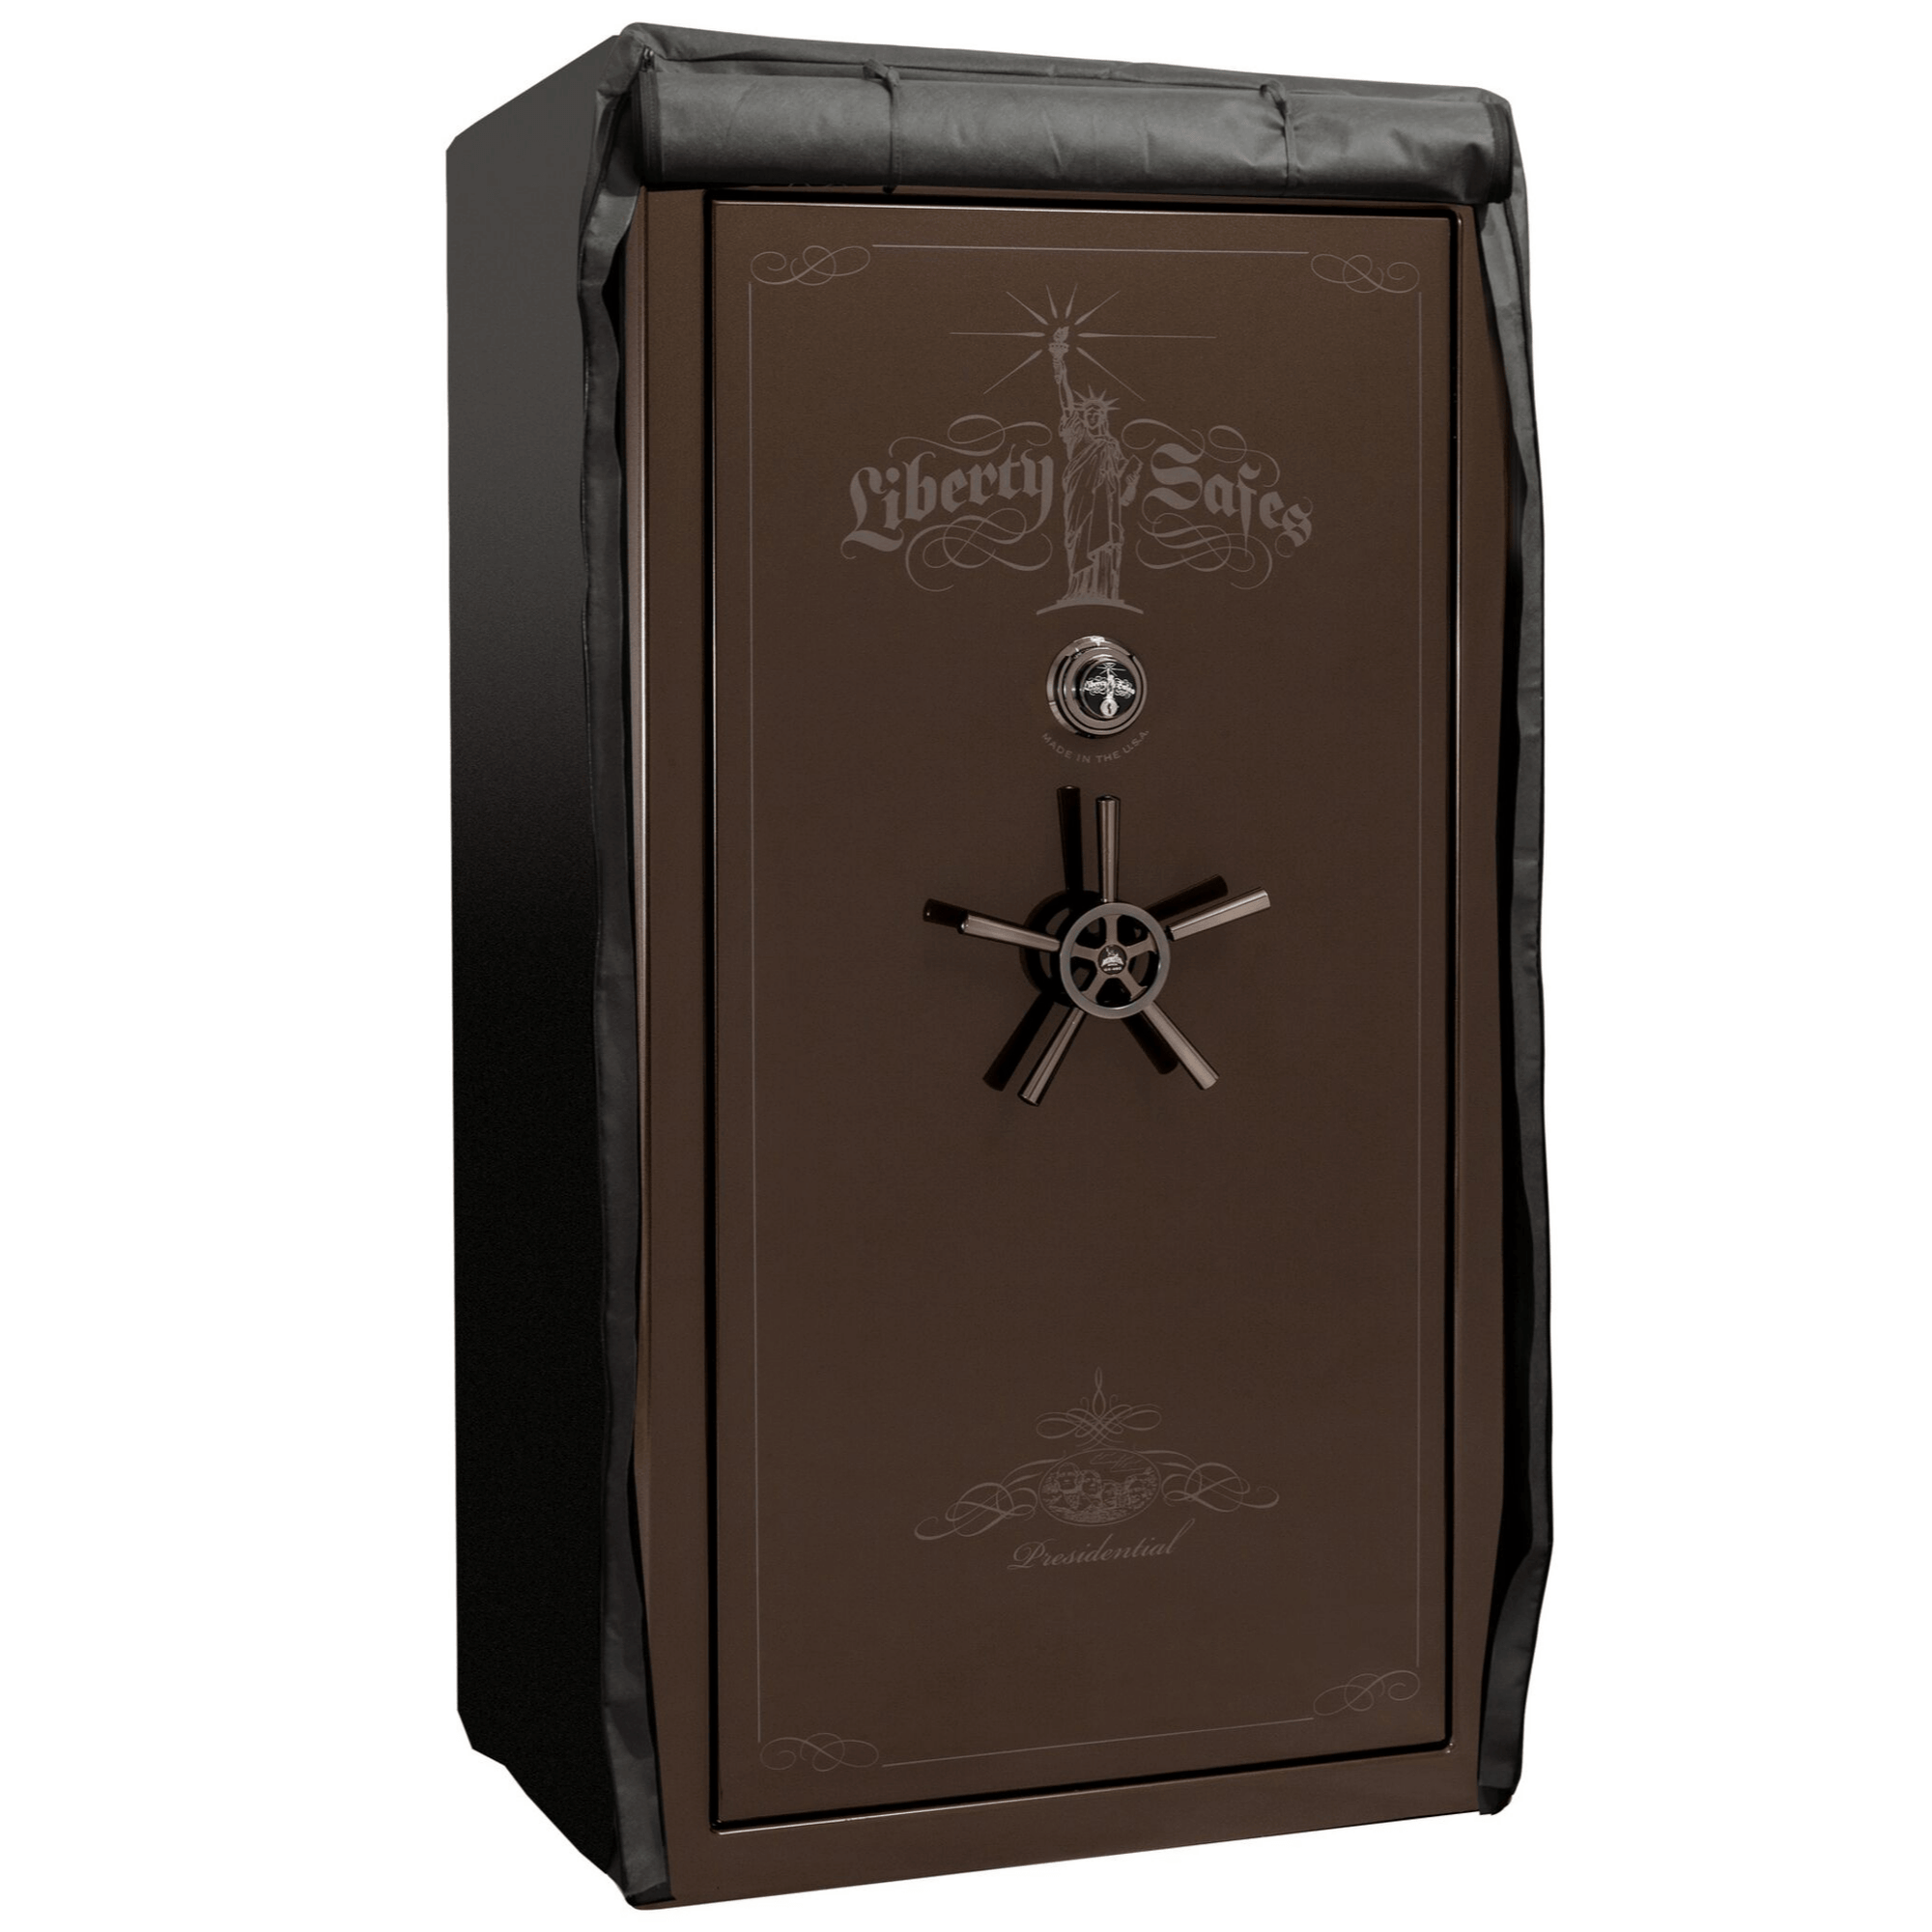 Accessory - Security - Safe Cover - 40 size safes